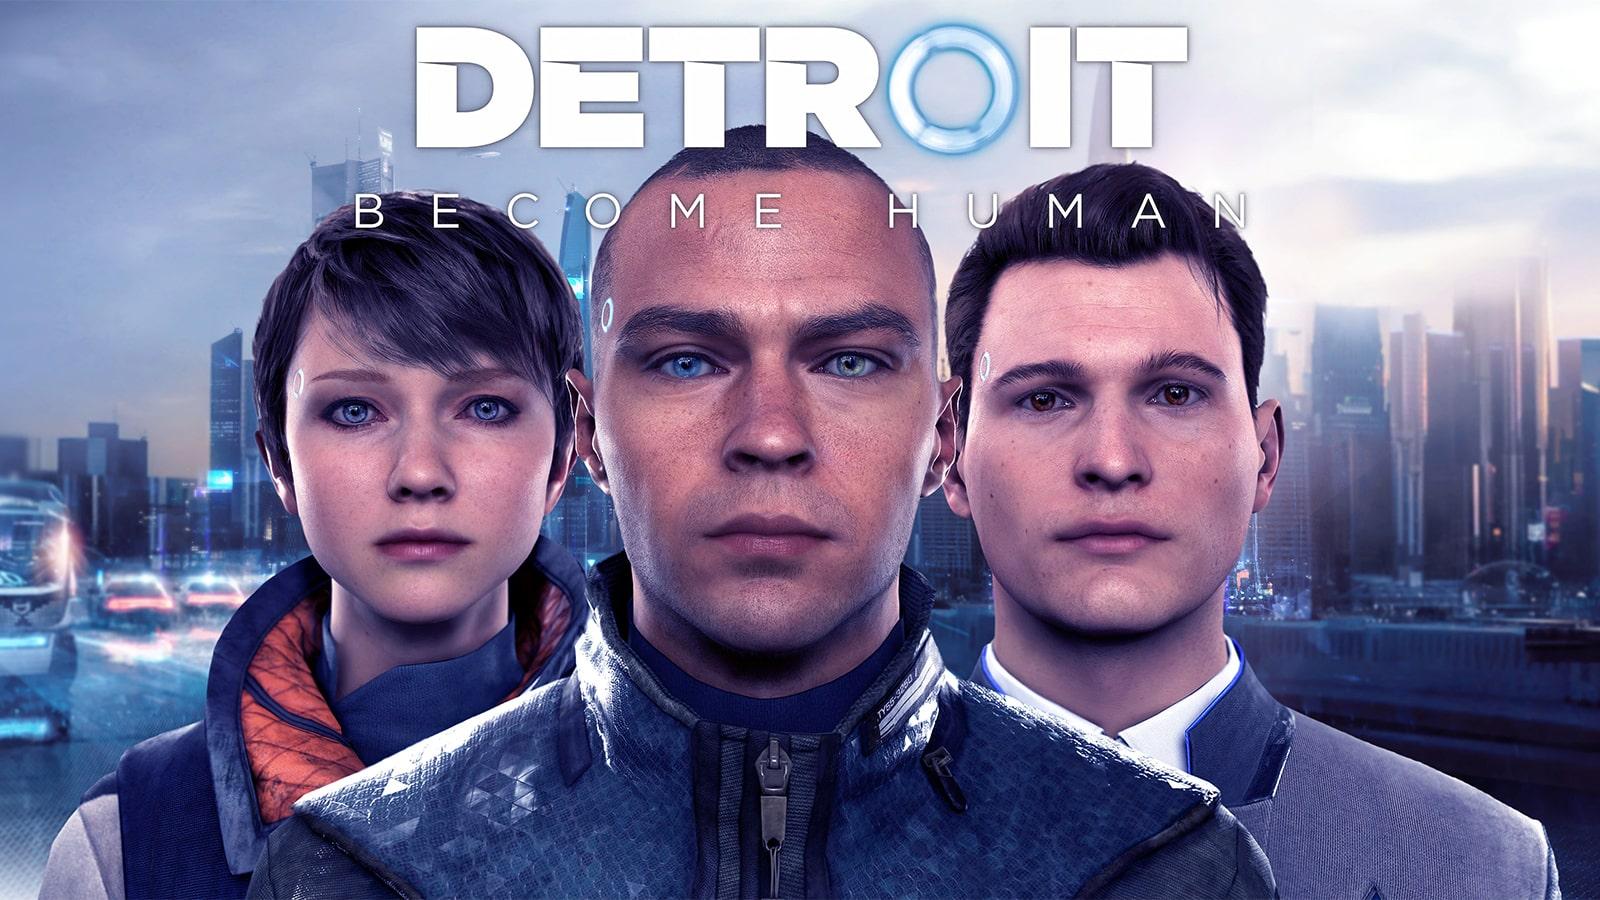 The three main cast of characters in Detroit Become Human